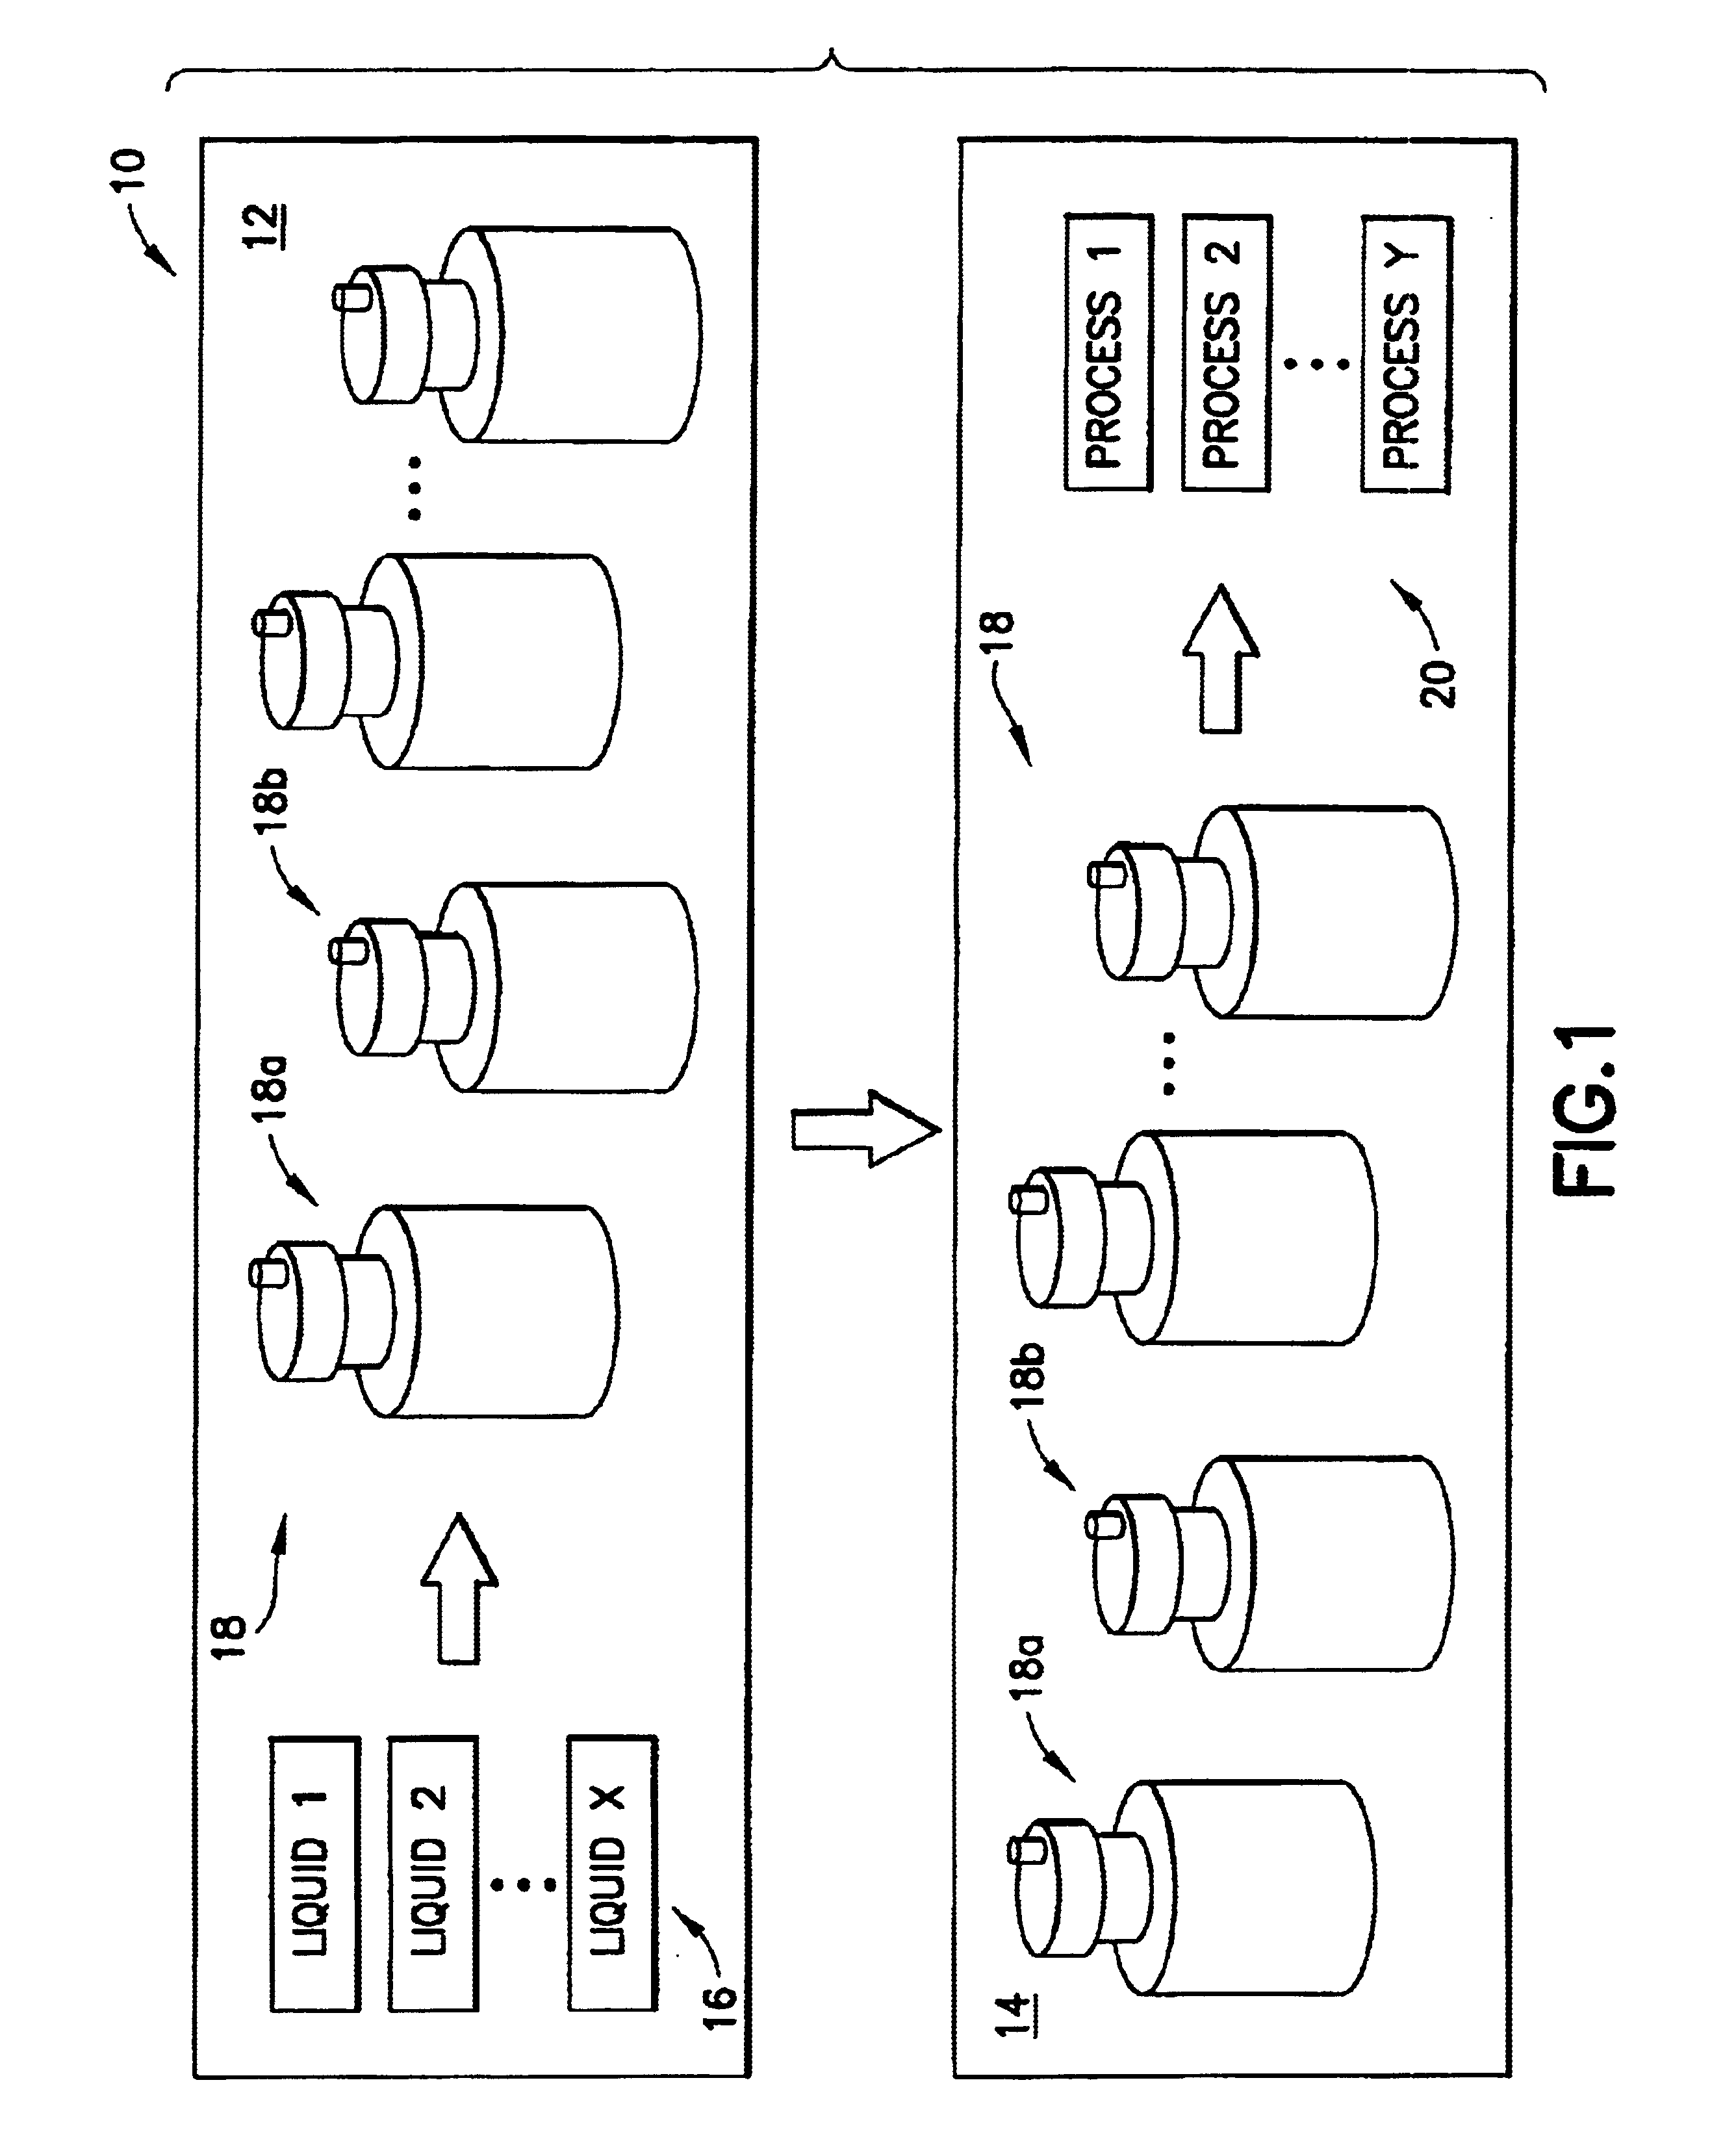 Liquid handling system with electronic information storage